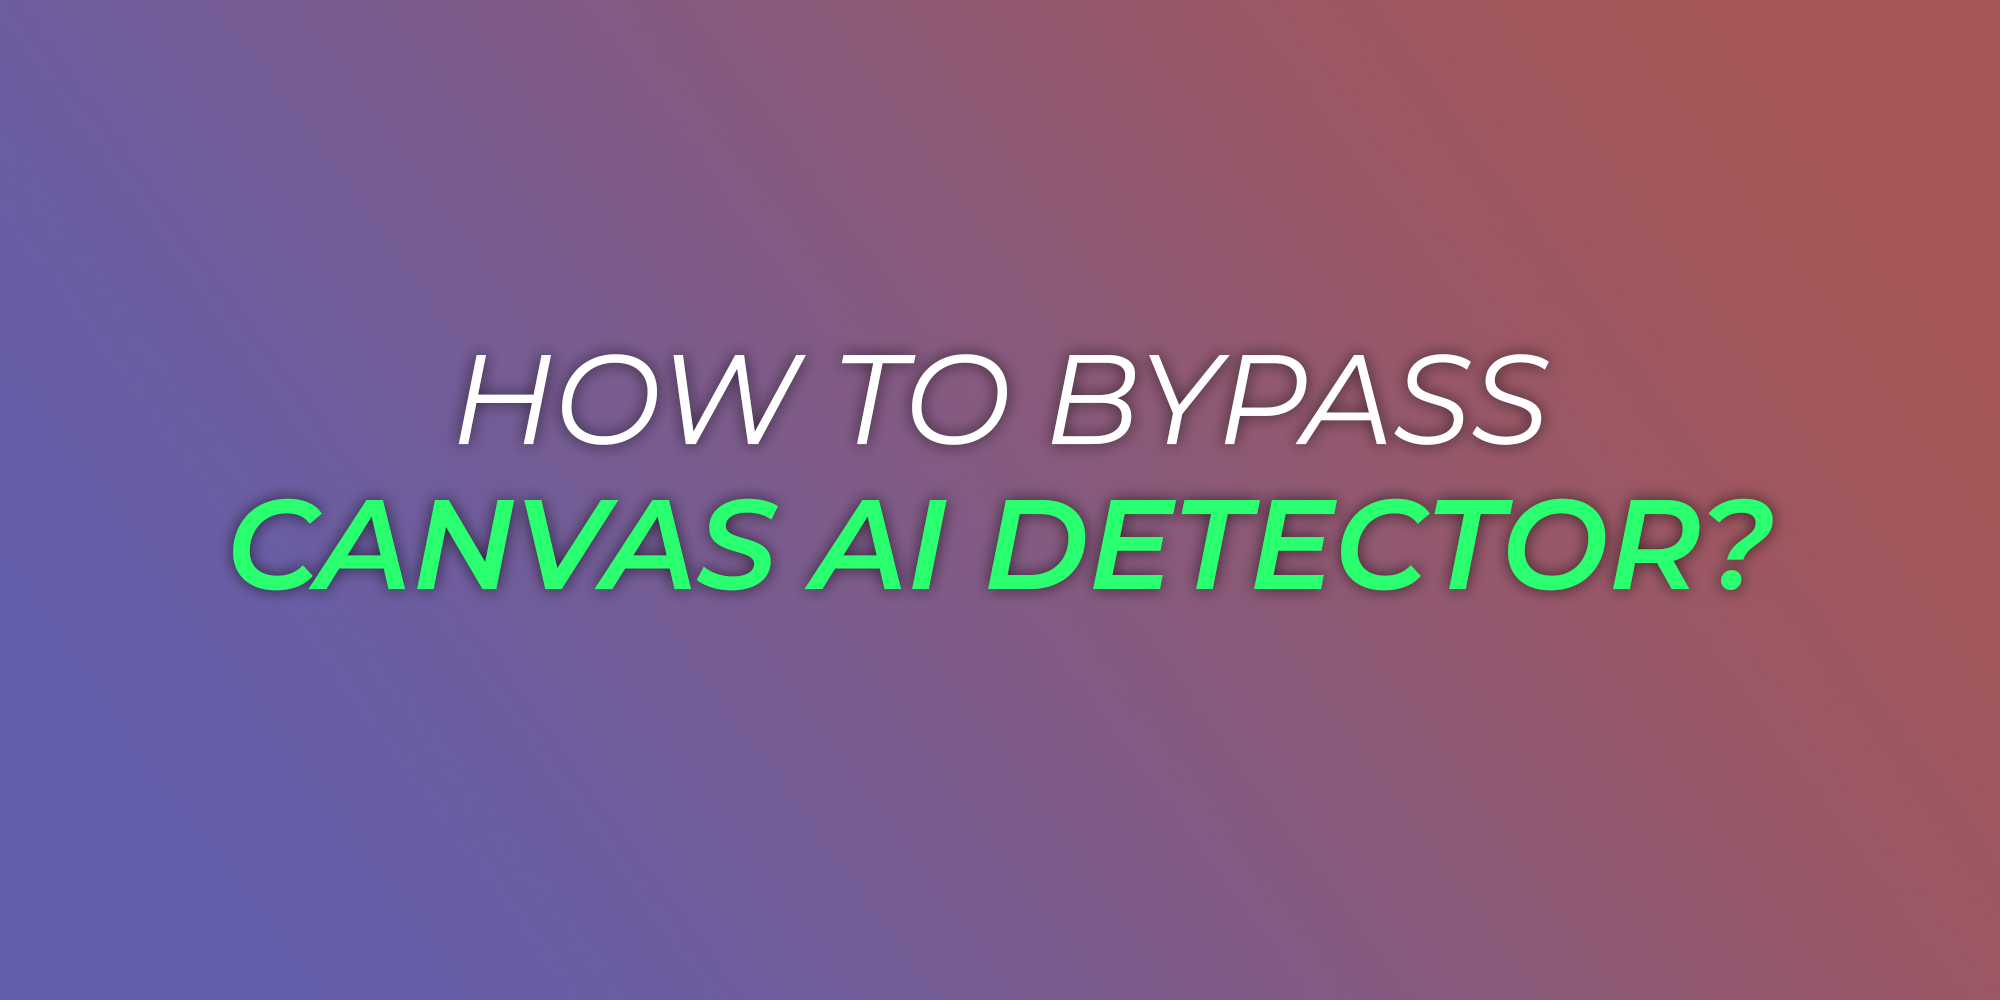 How bypass canvas ai detector